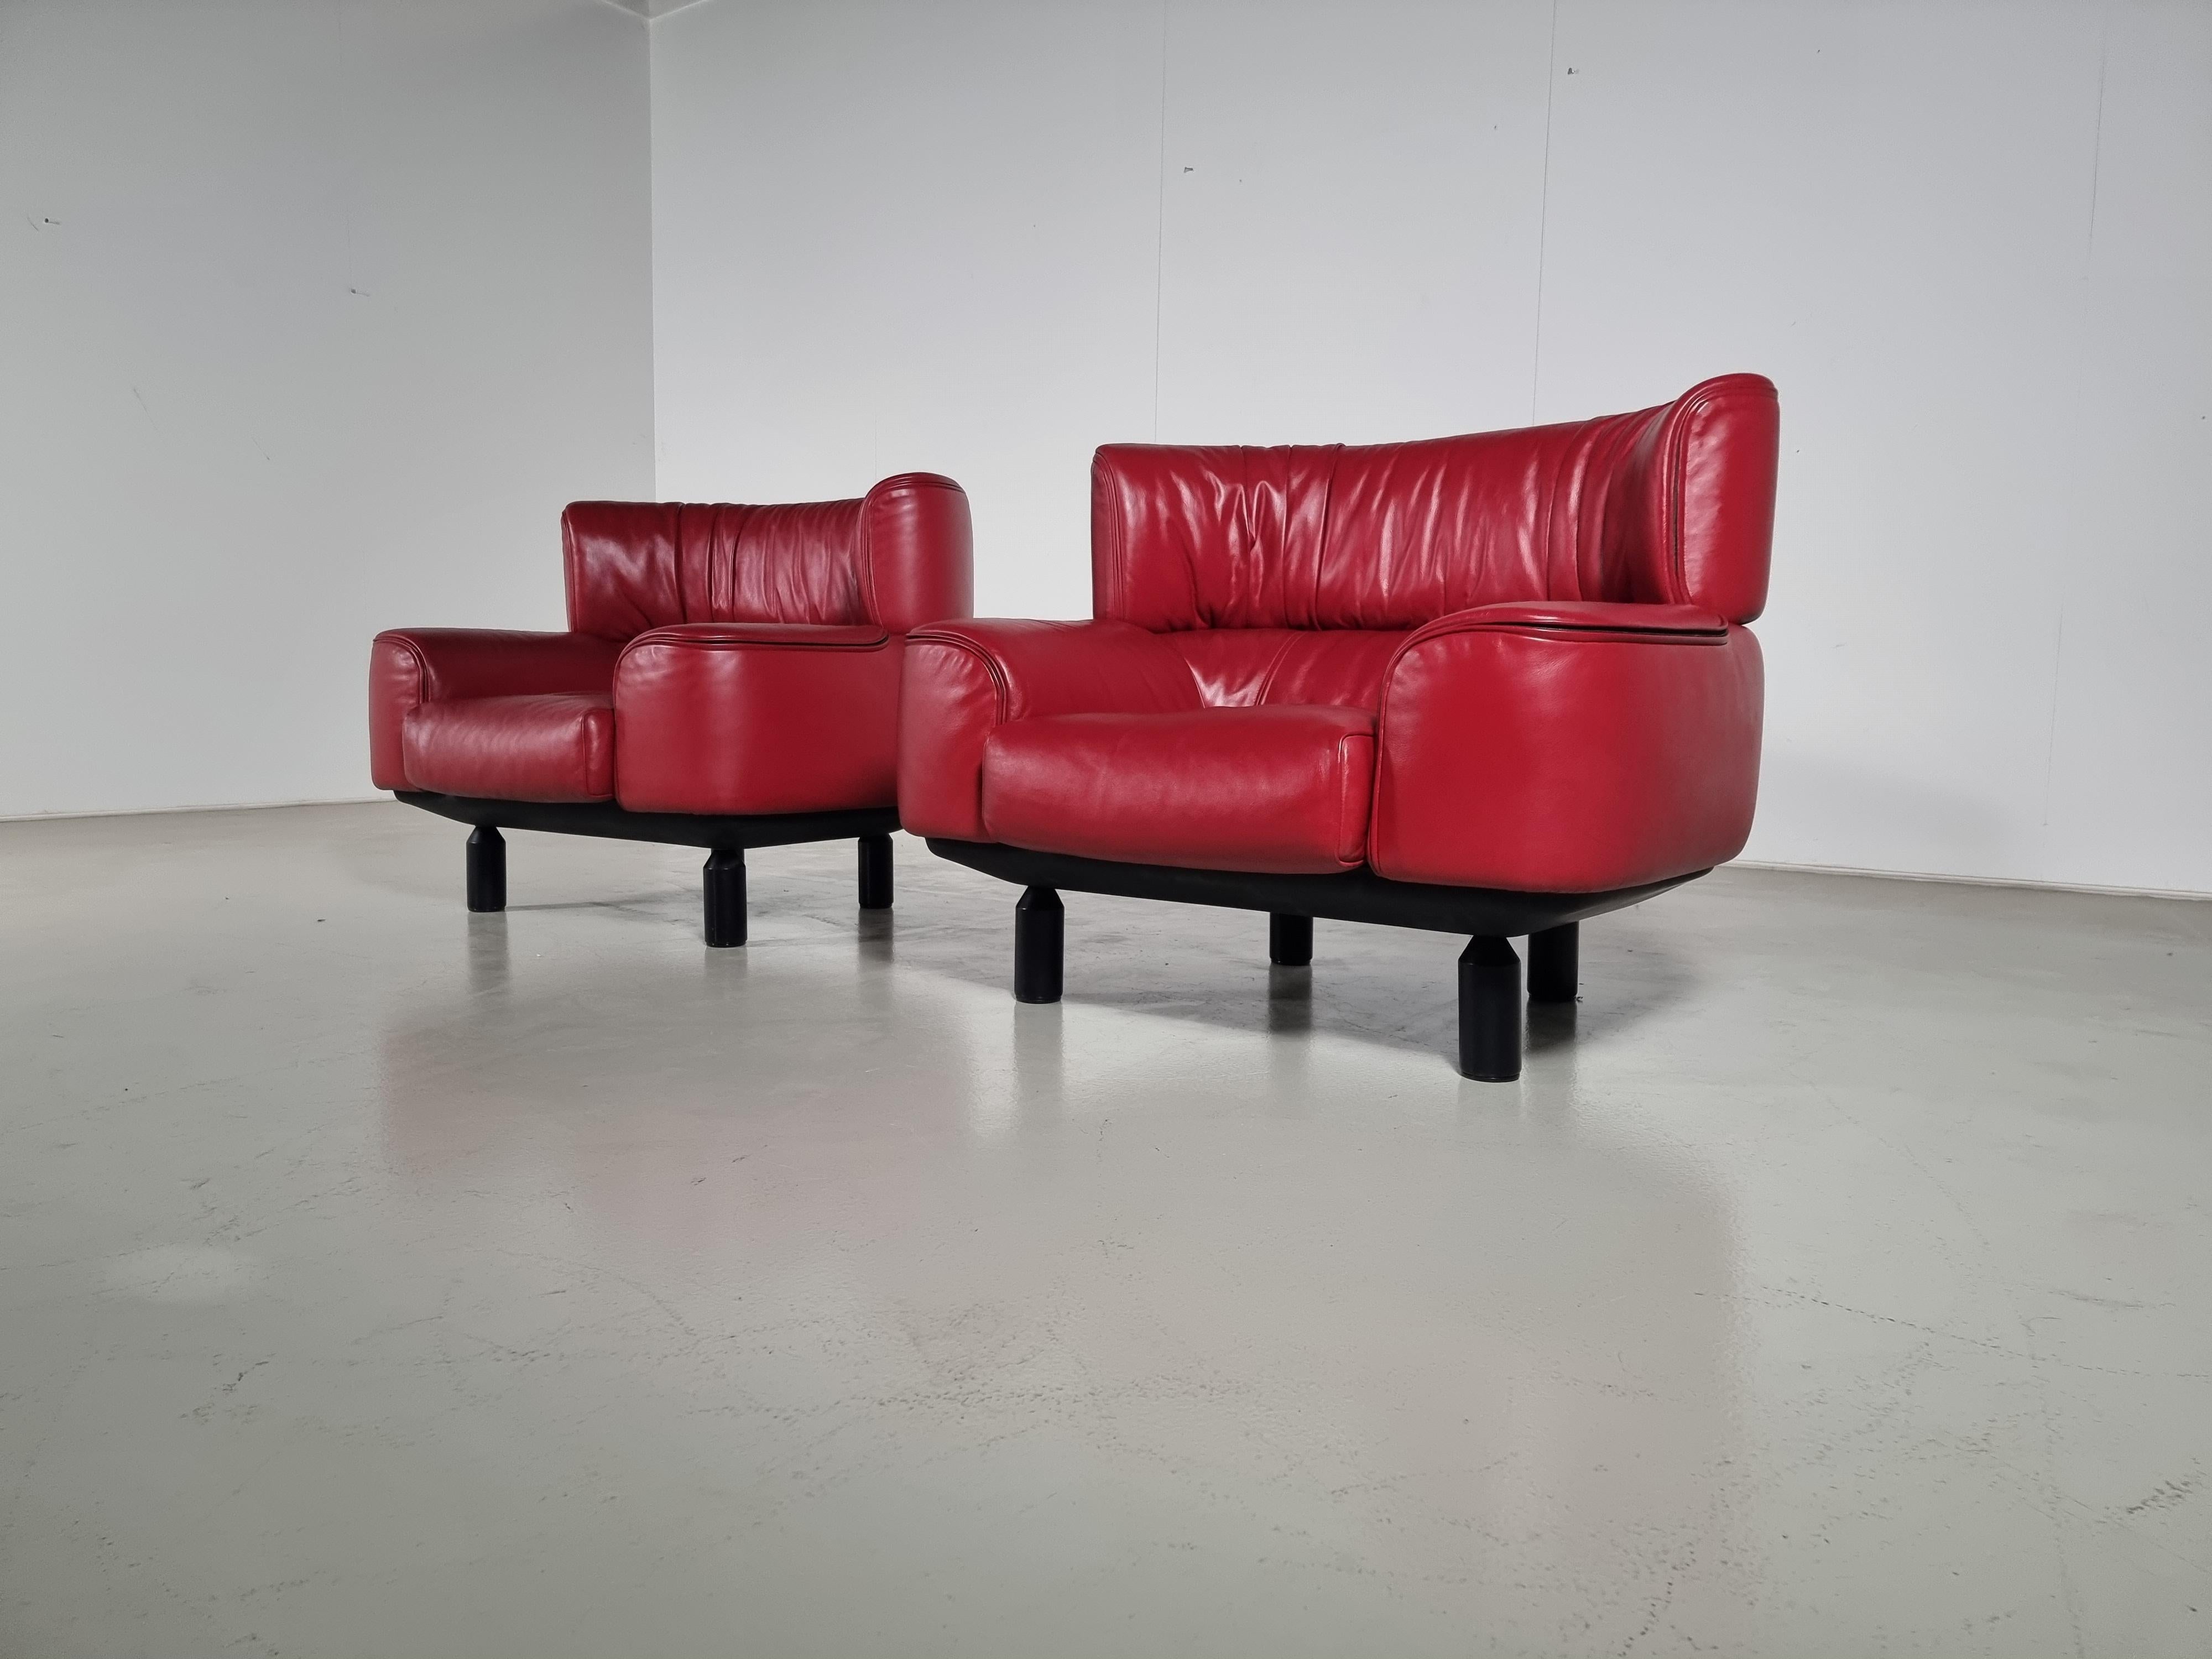 European Set of 2  Bull chairs by Gianfranco Frattini for Cassina, Italy, 1987